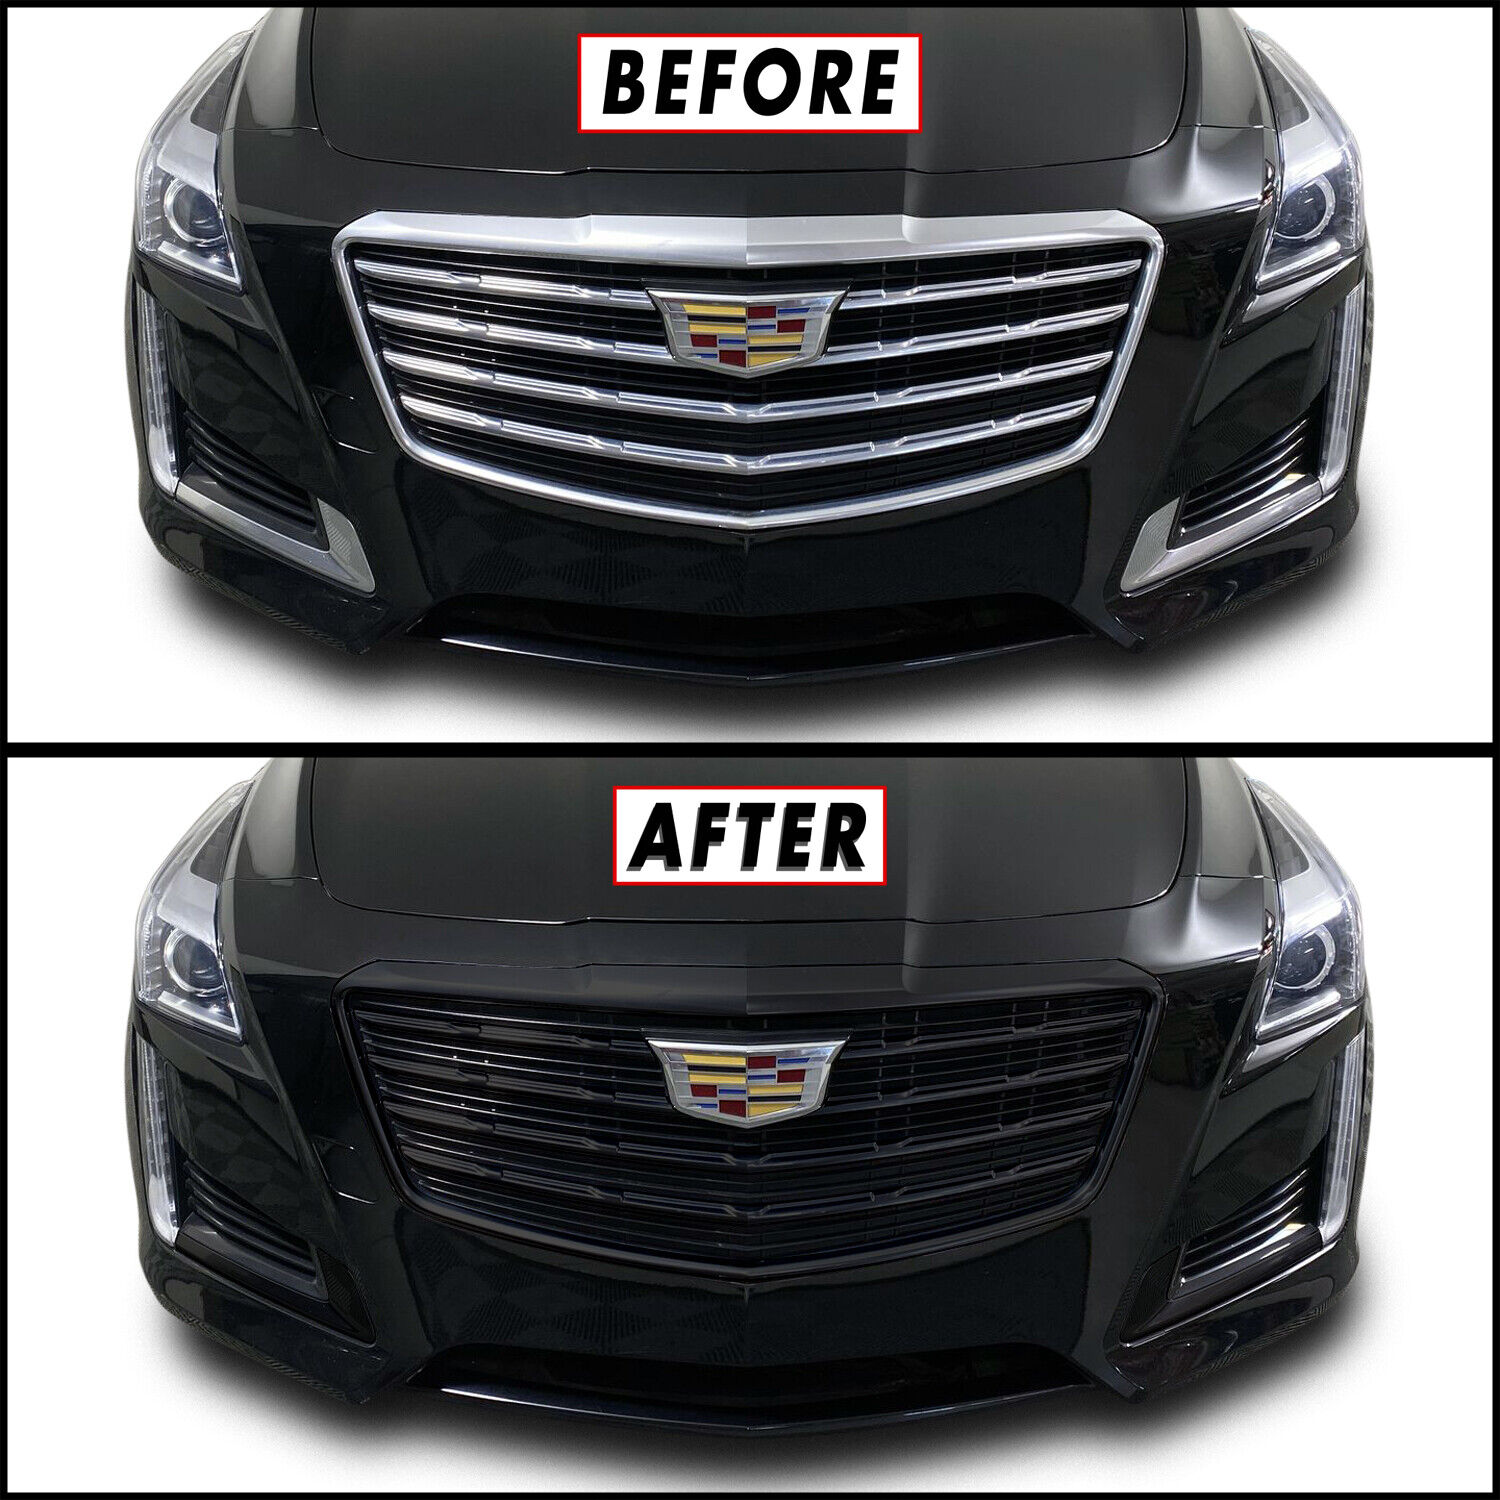 Chrome Delete Blackout Overlay for 2015-19 Cadillac CTS Full Front Bumper Grill